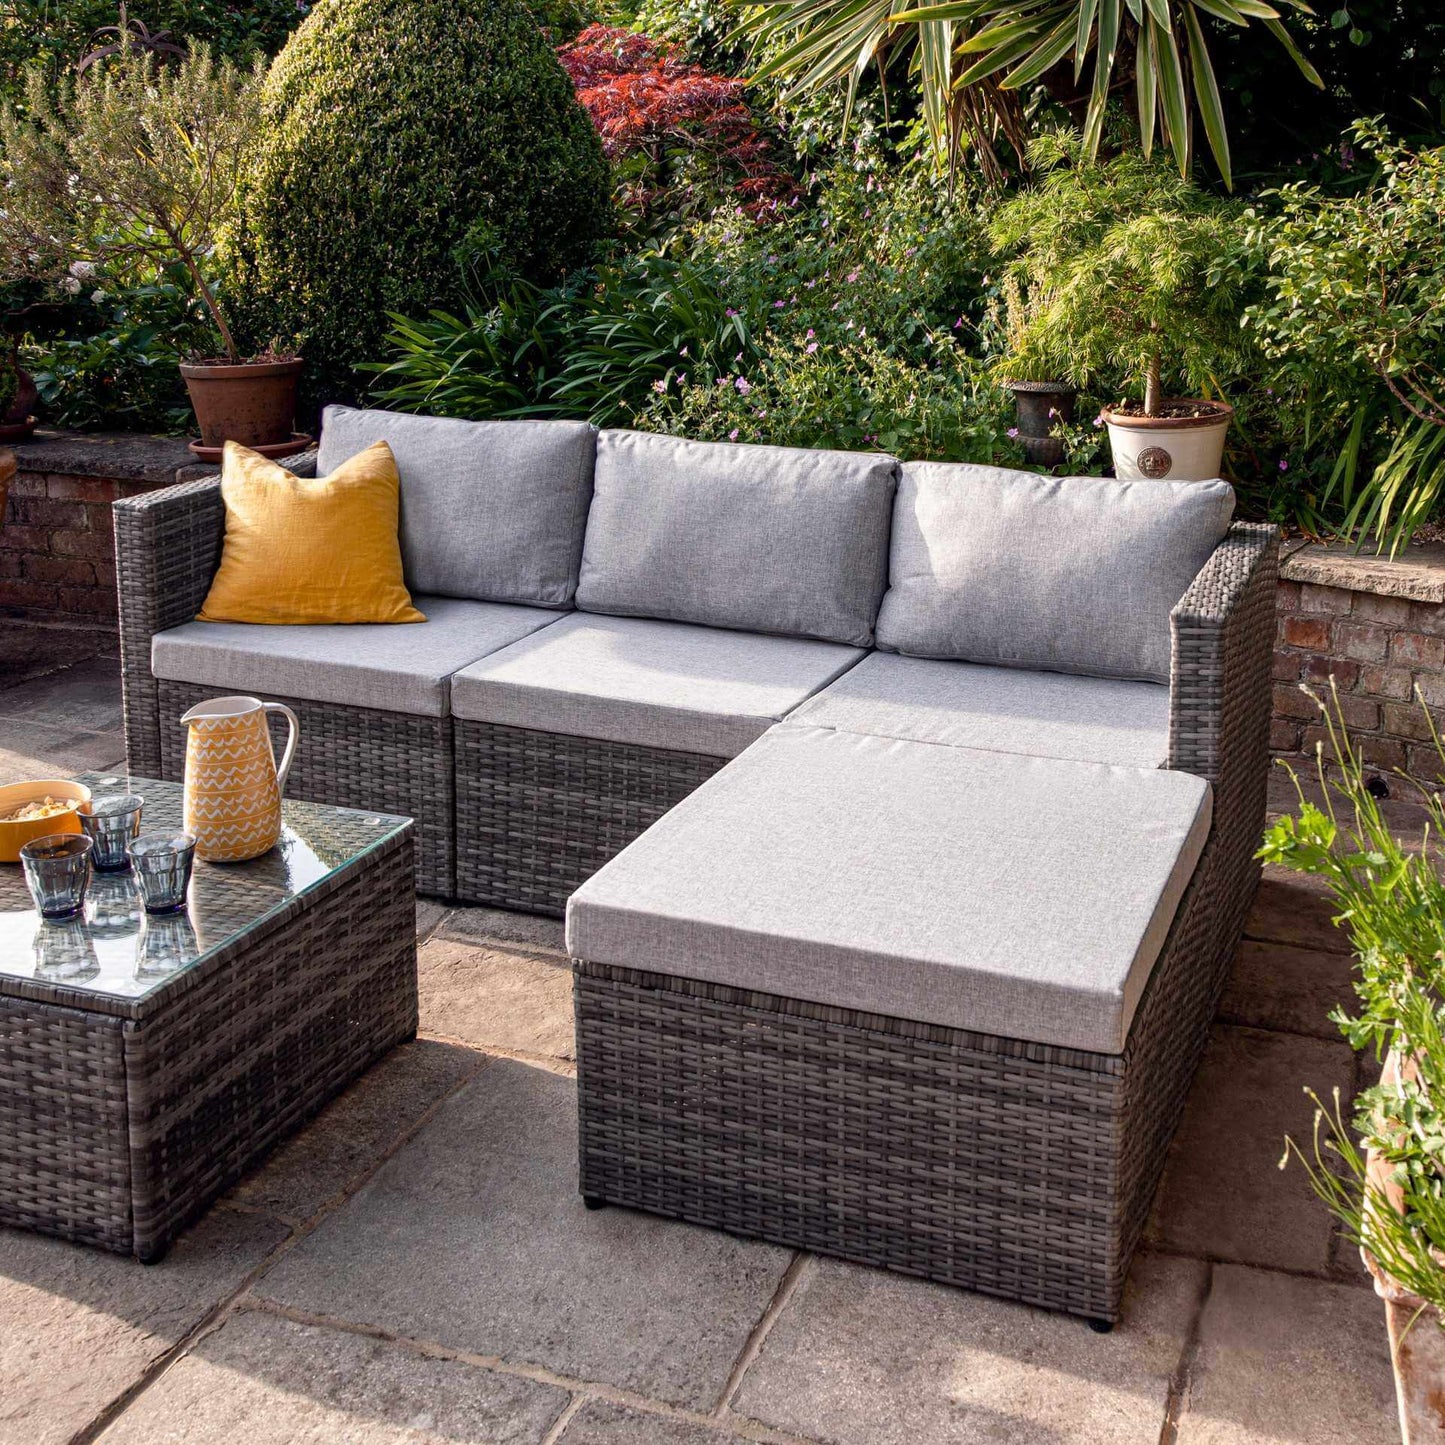 4 Seater Rattan Corner Sofa Set with Cantilever Parasol and Base - Grey Weave - Laura James